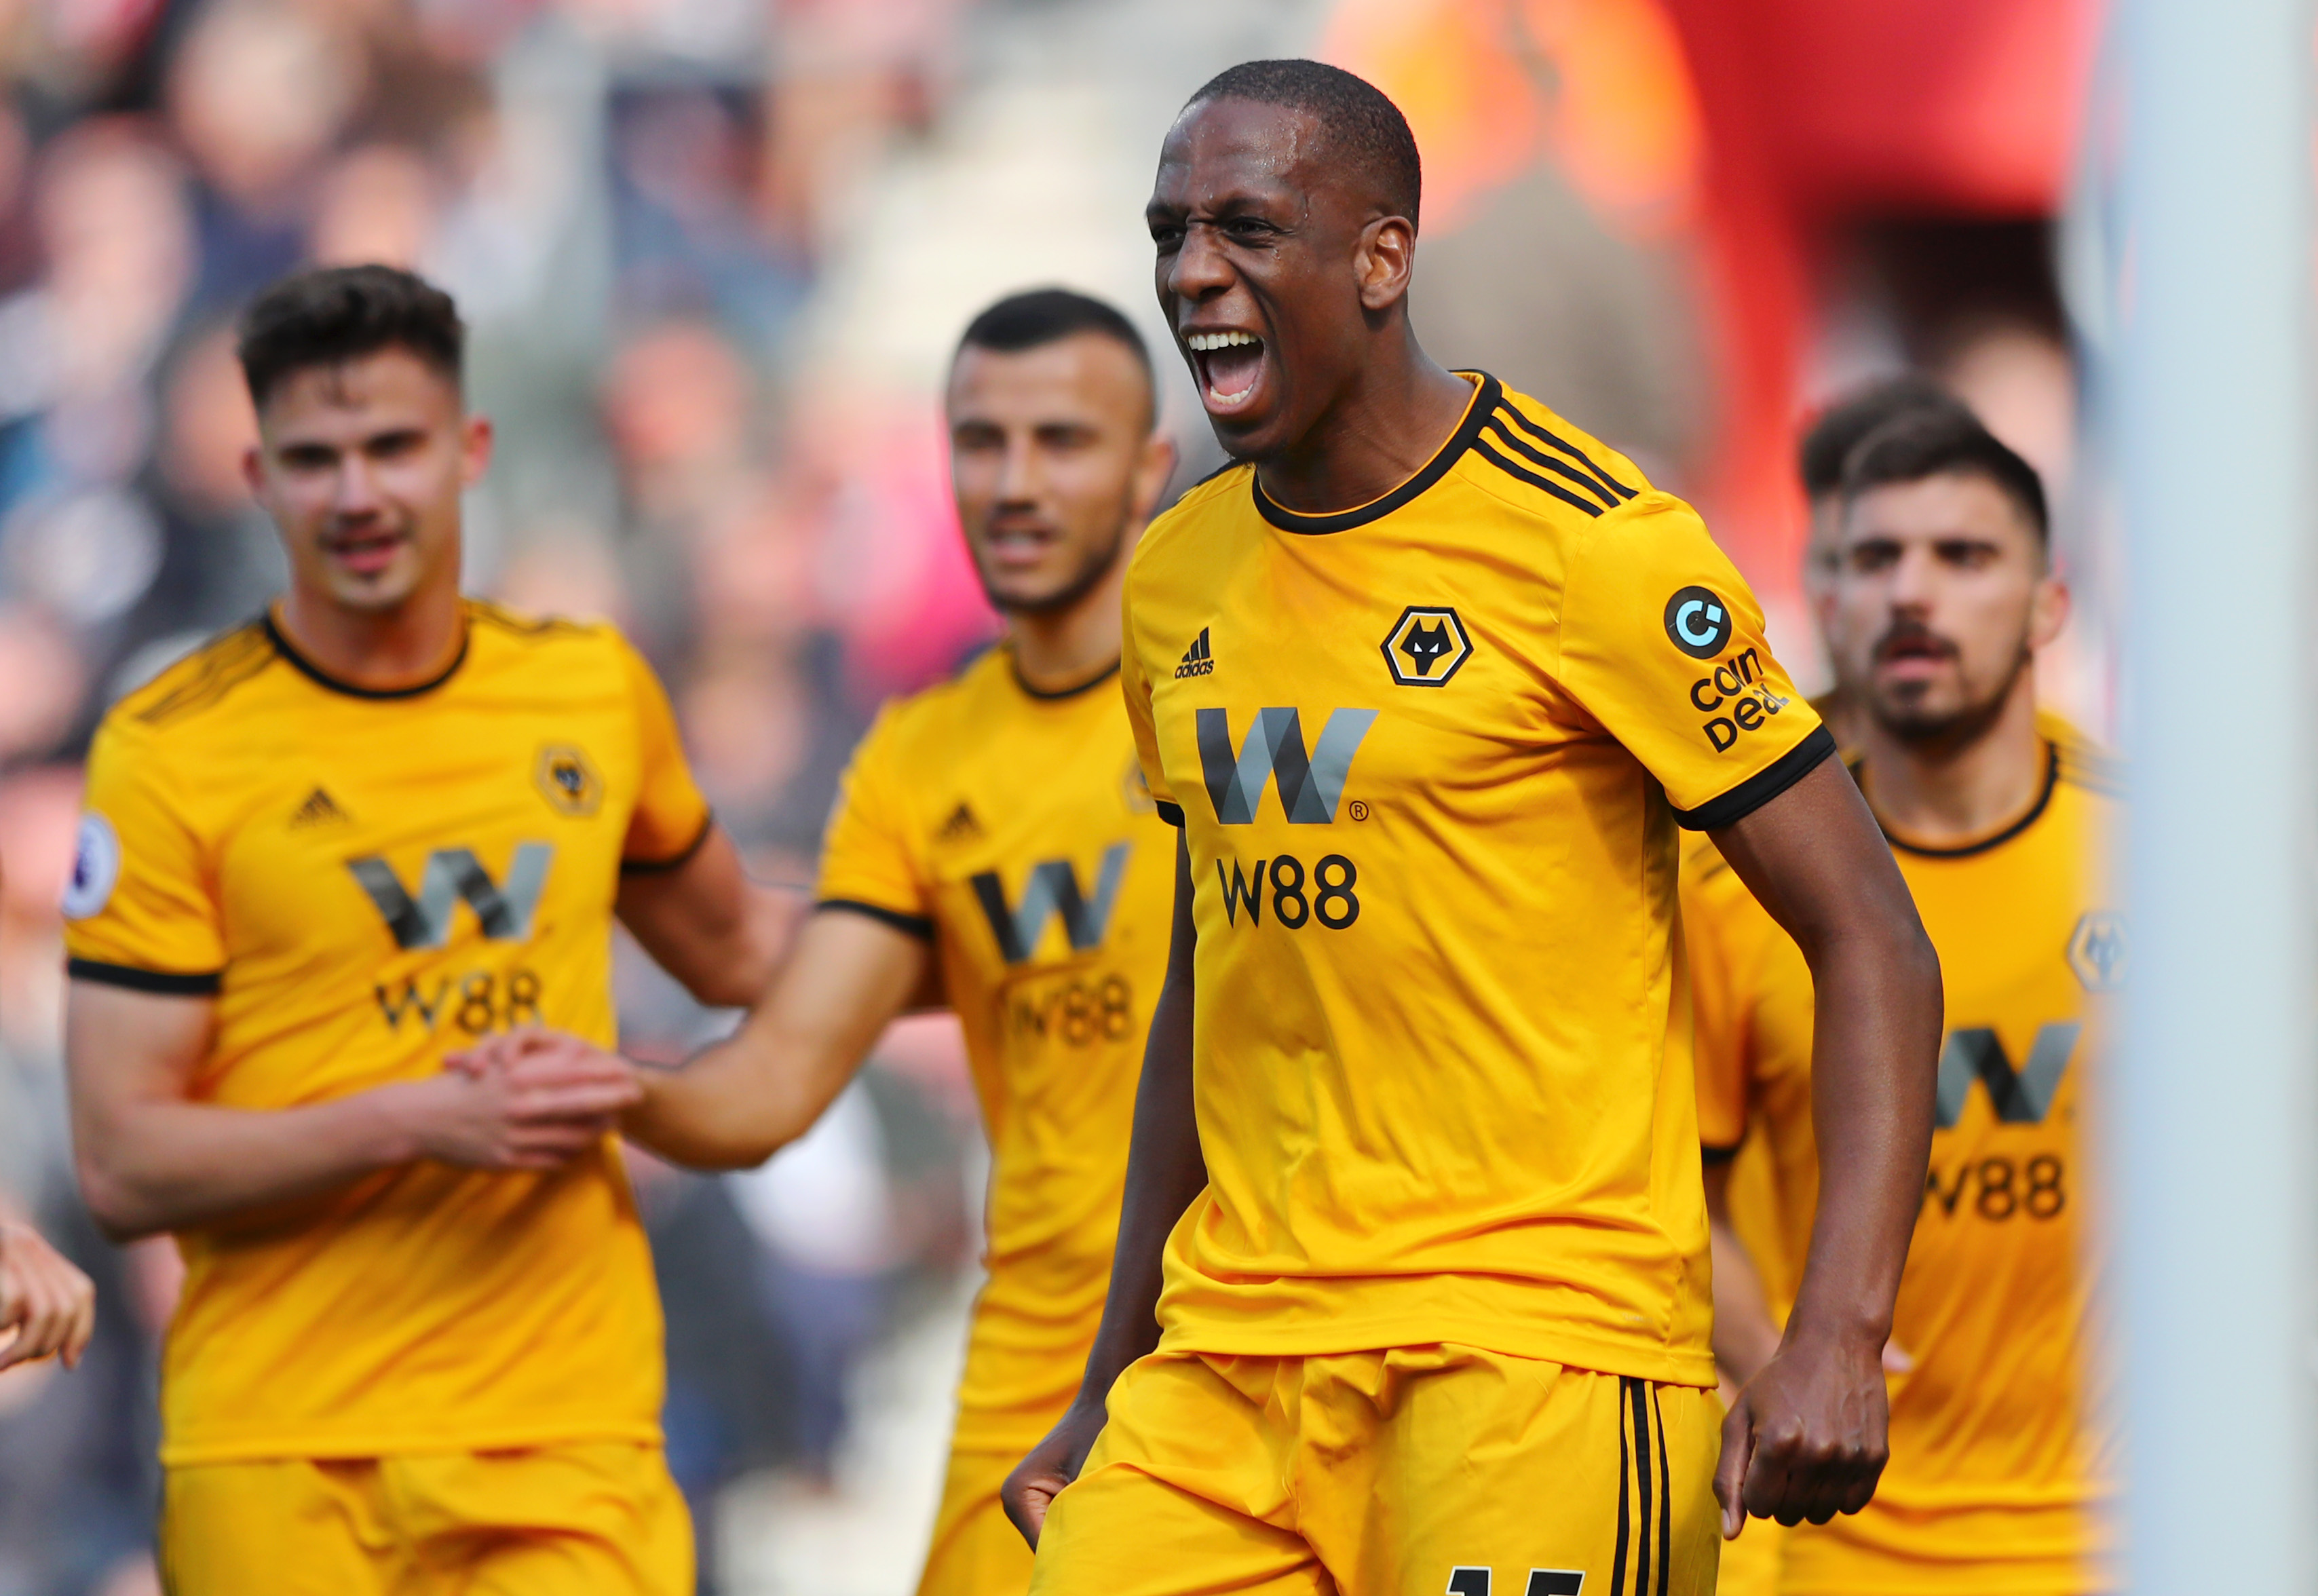 The unsung hero in Wolves' fairytale campaign (Photo by Matthew Lewis/Getty Images)